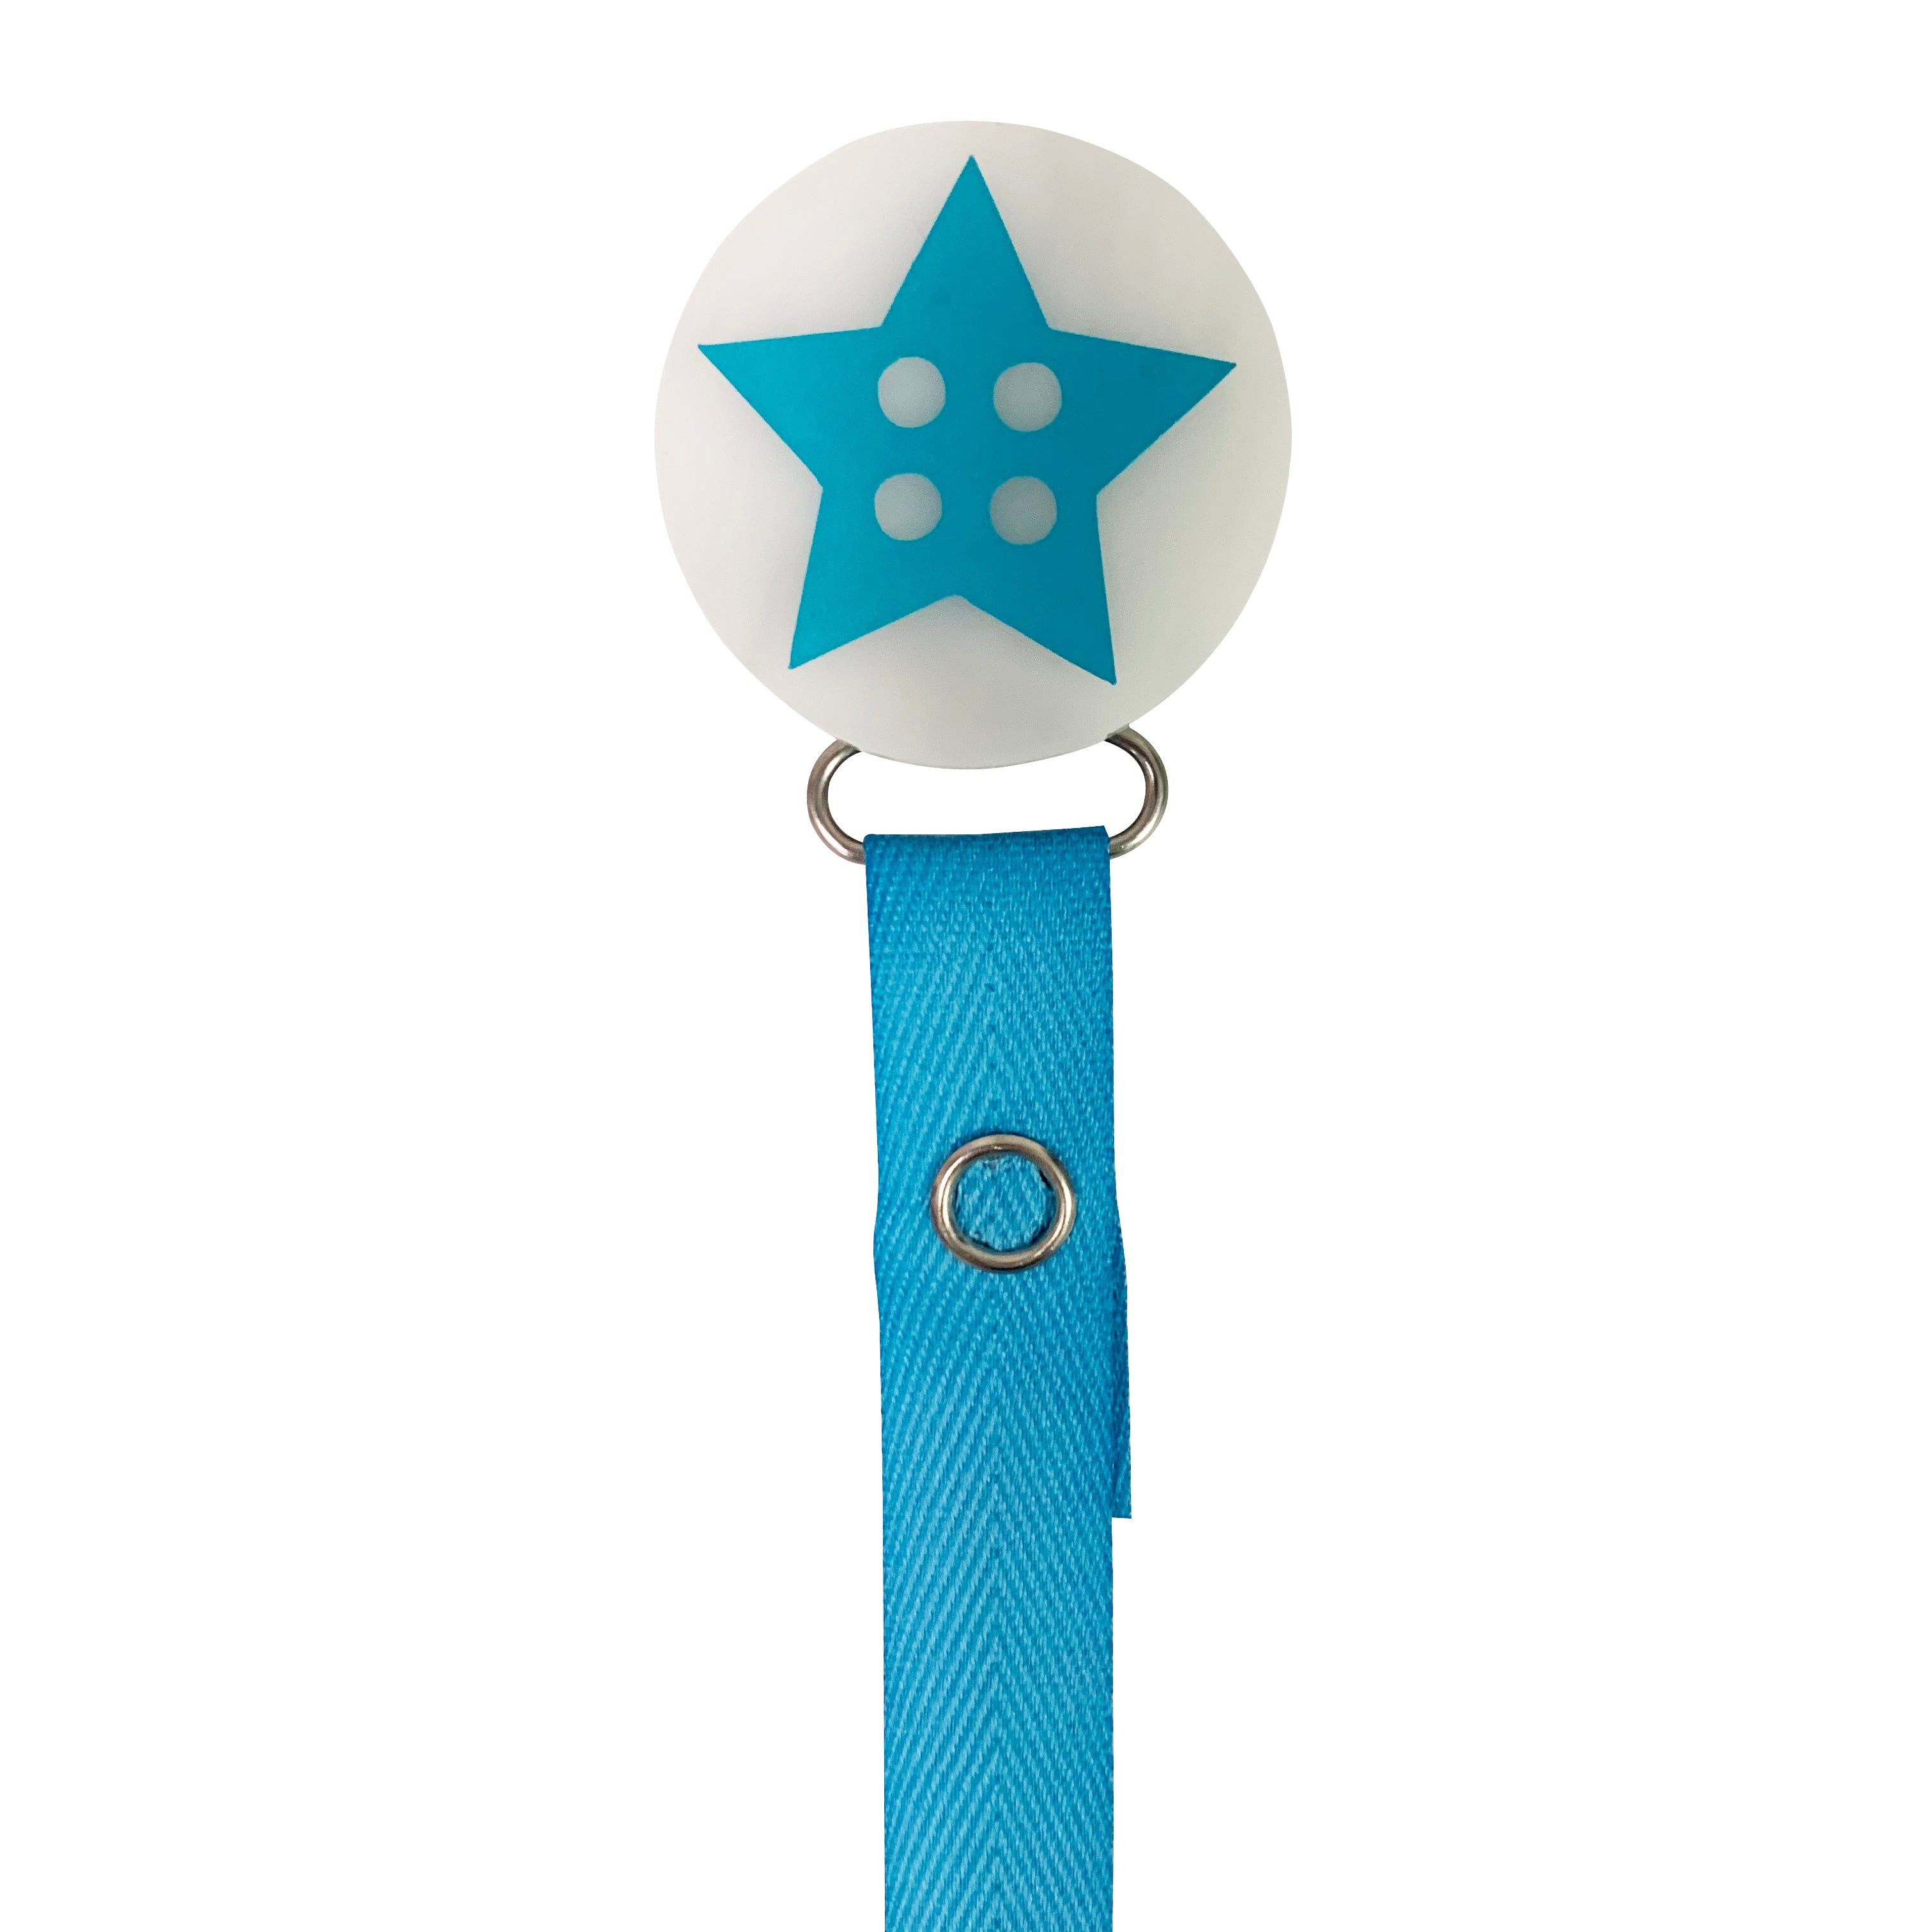 Classy Paci fun "cute as a button" turquoise star, denim/blue for baby toddler girls boys pacifier clip